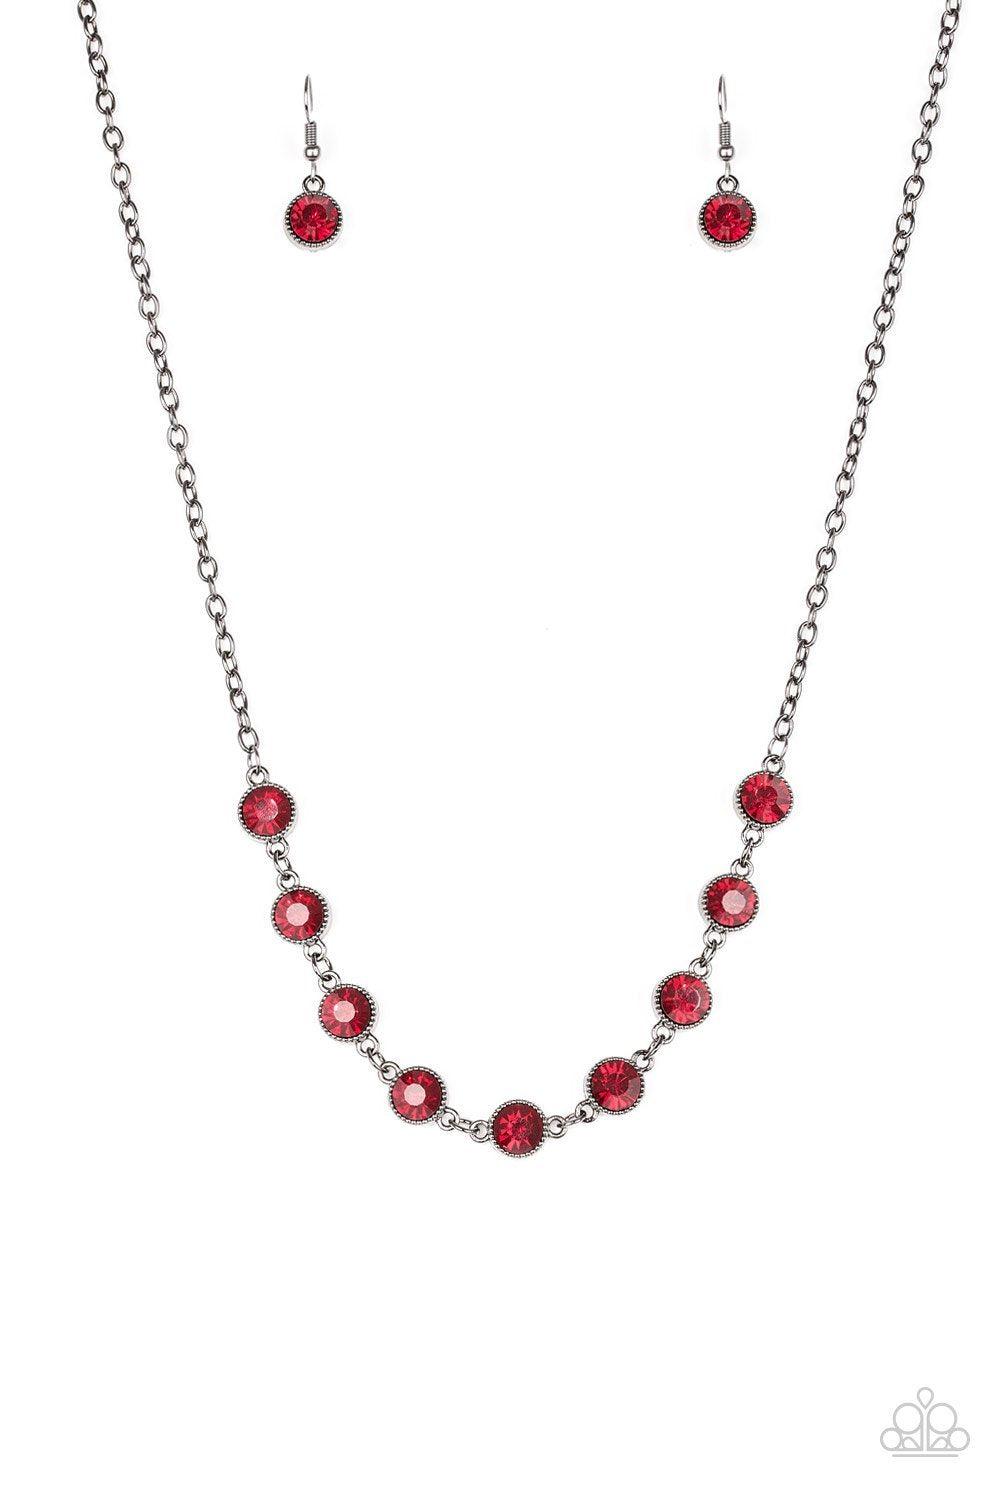 Starlit Socials Red Gem and Gunmetal Necklace - Paparazzi Accessories-CarasShop.com - $5 Jewelry by Cara Jewels